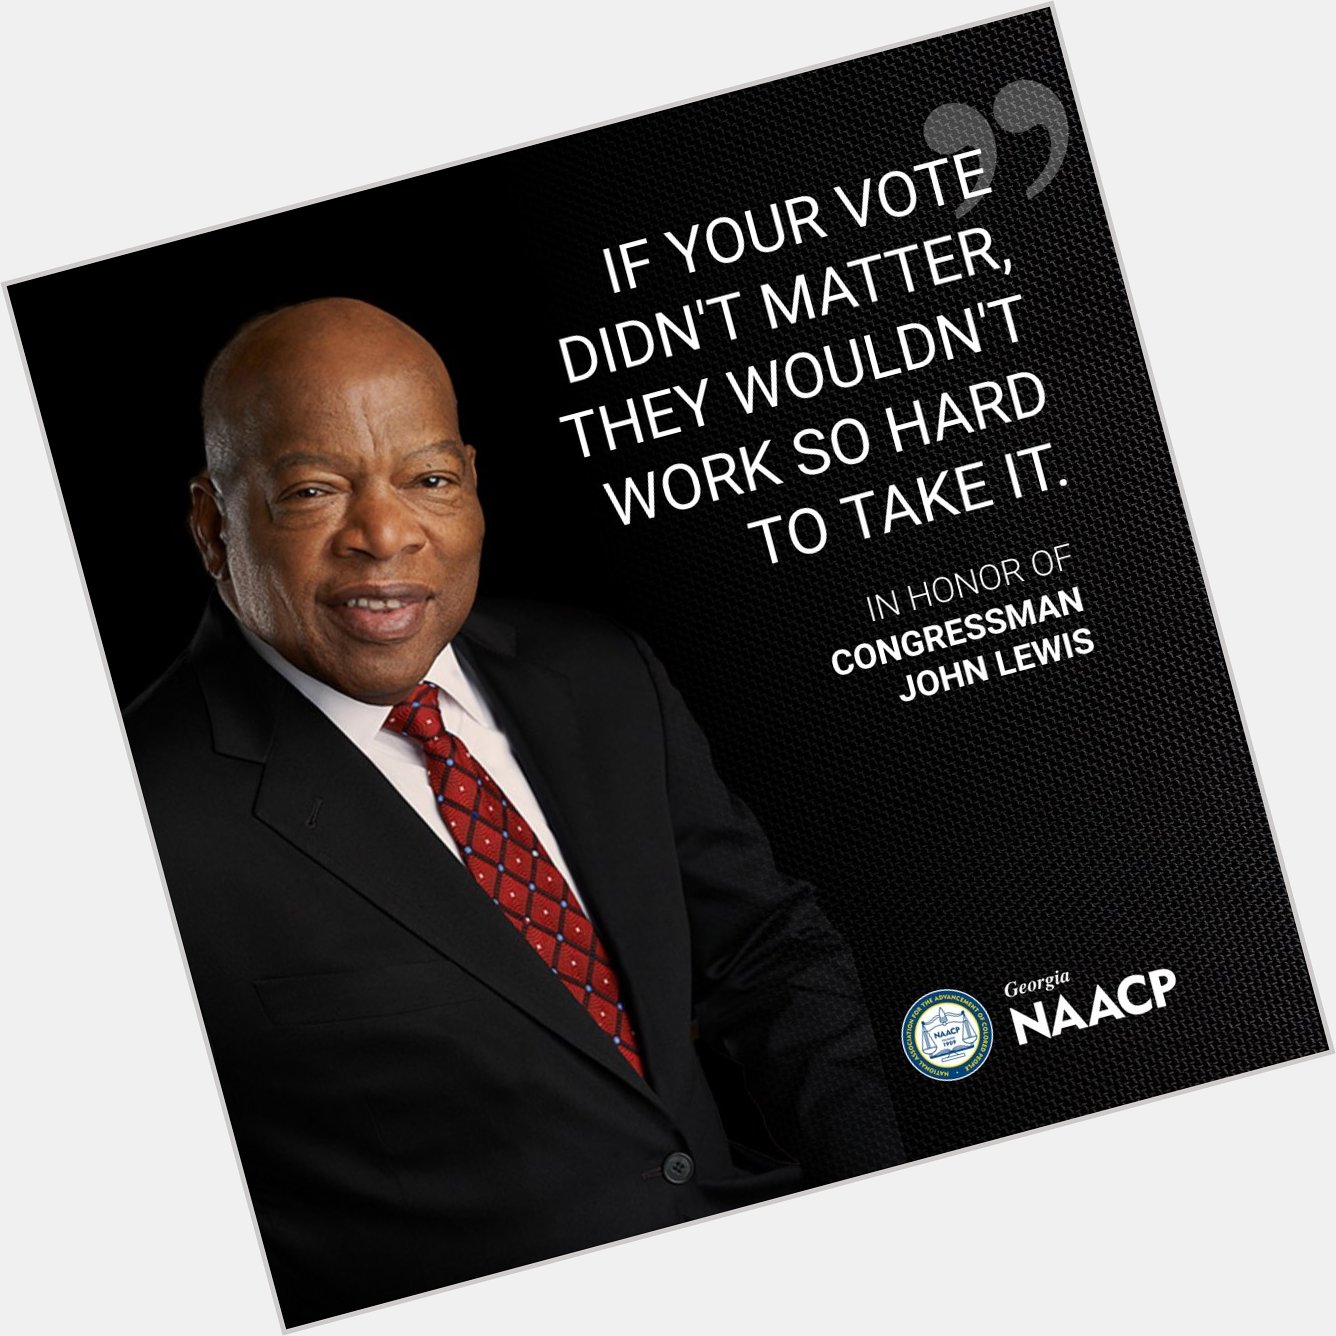 Wise words from our Congressman John Lewis. Happy Belated Birthday, from Georgia NAACP!  